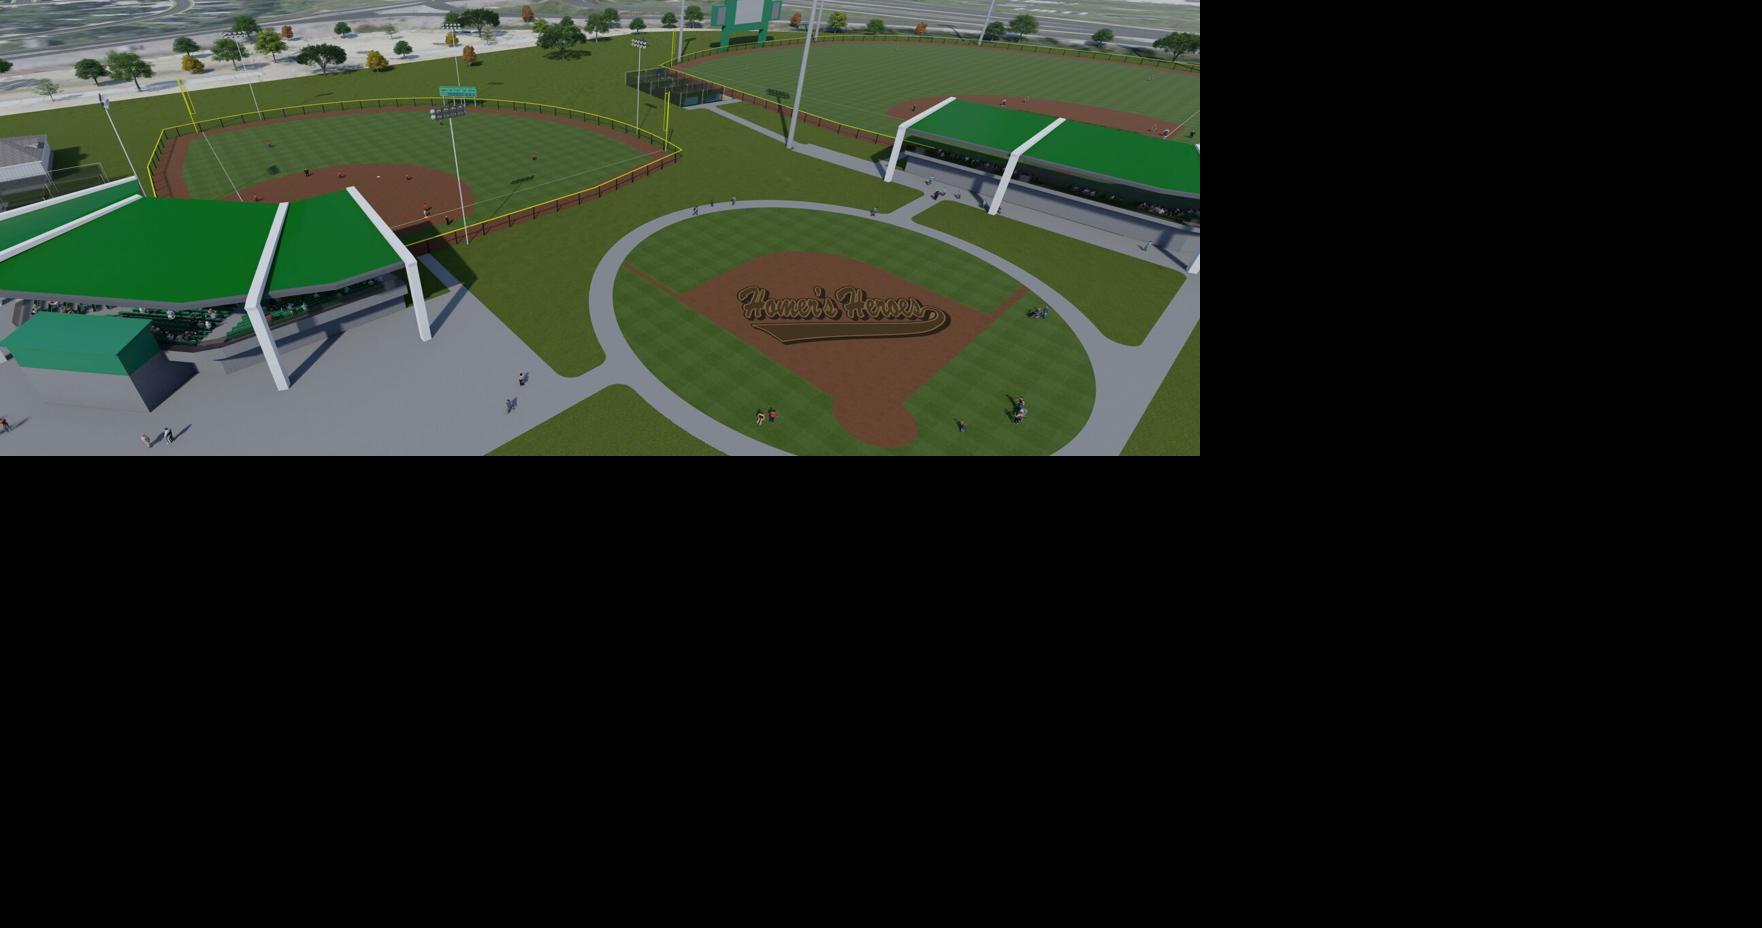 Editorial, 10/6: Youth baseball complex is a boon to Lincoln for many reasons